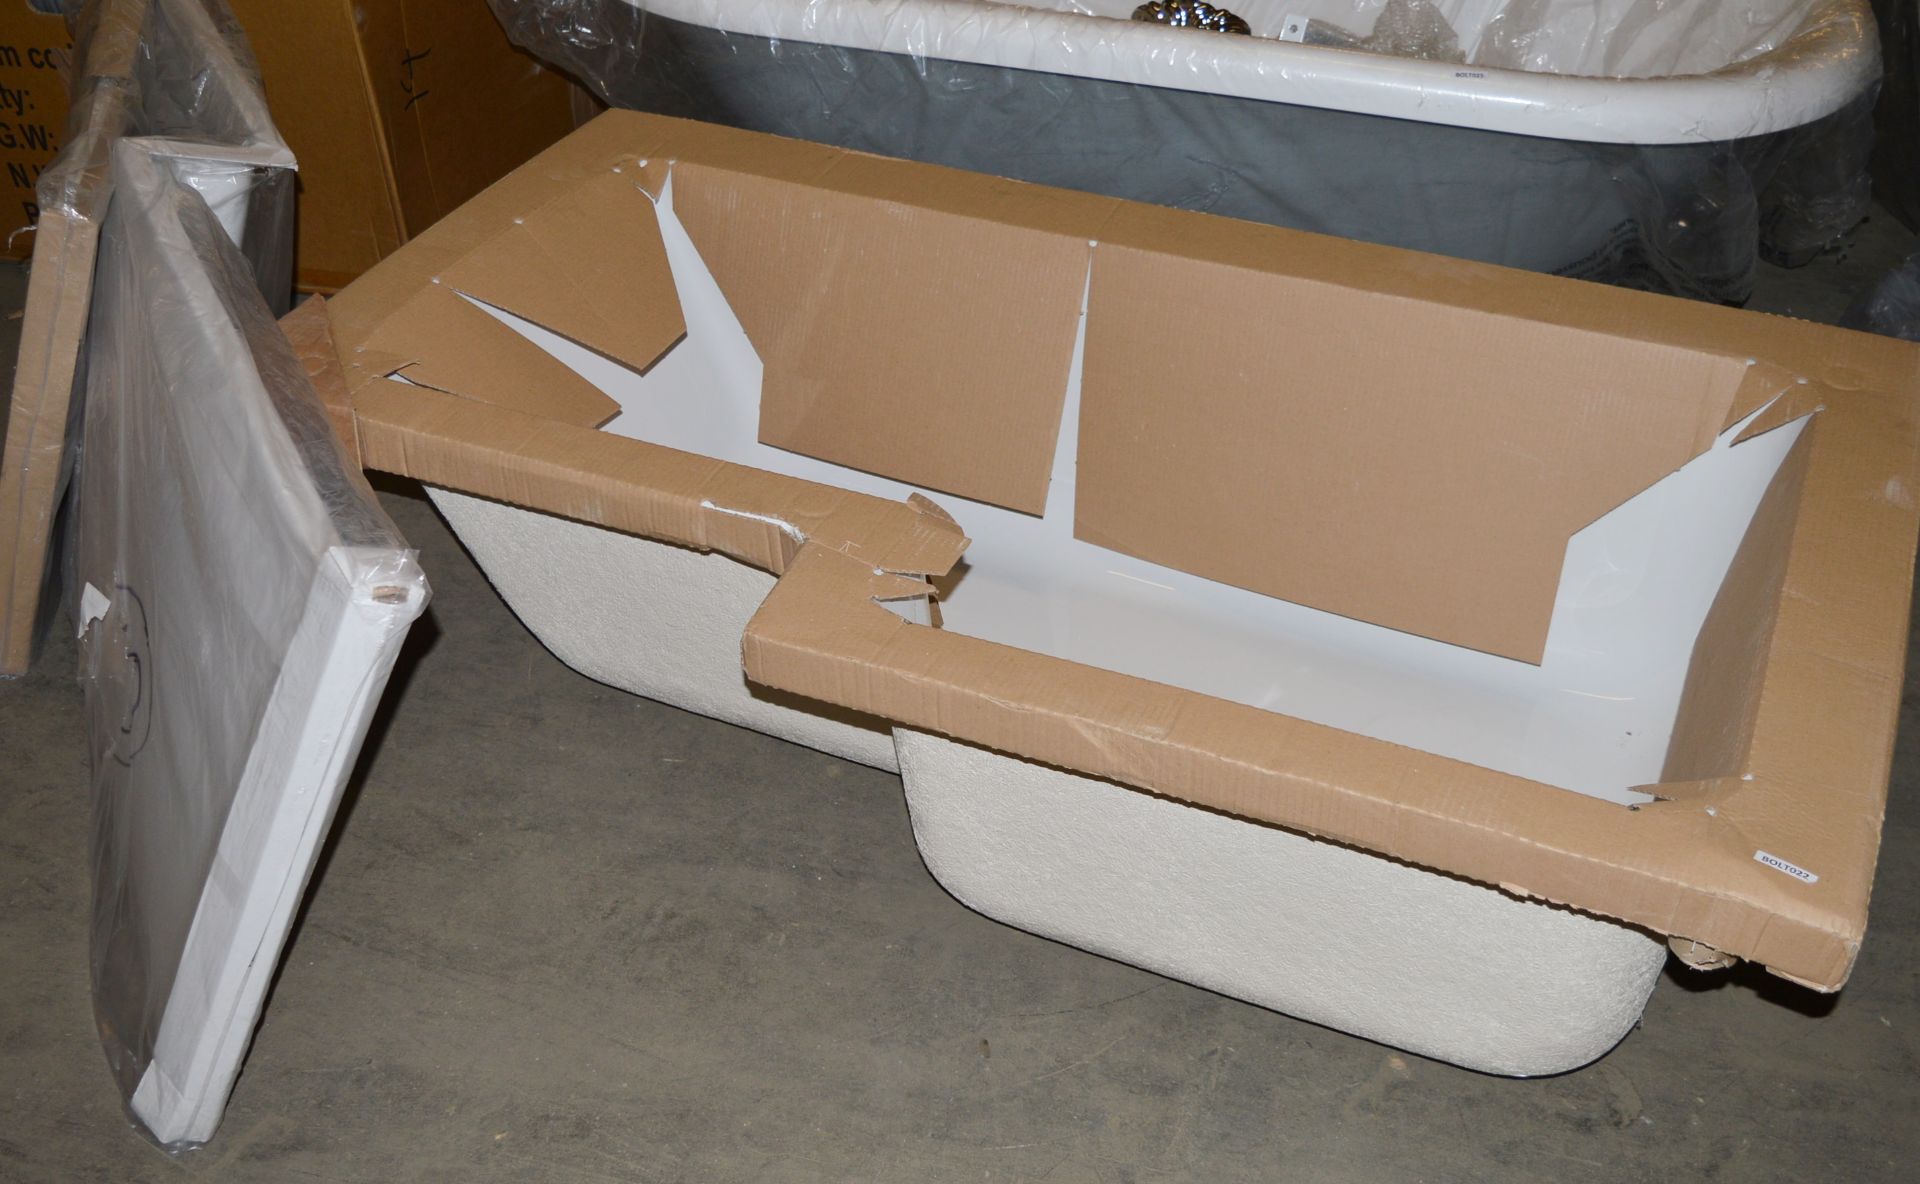 1 x Boston Right Hand L Shape Bath - Includes Side Panels - High Quality Acrylic Finish - - Image 2 of 6